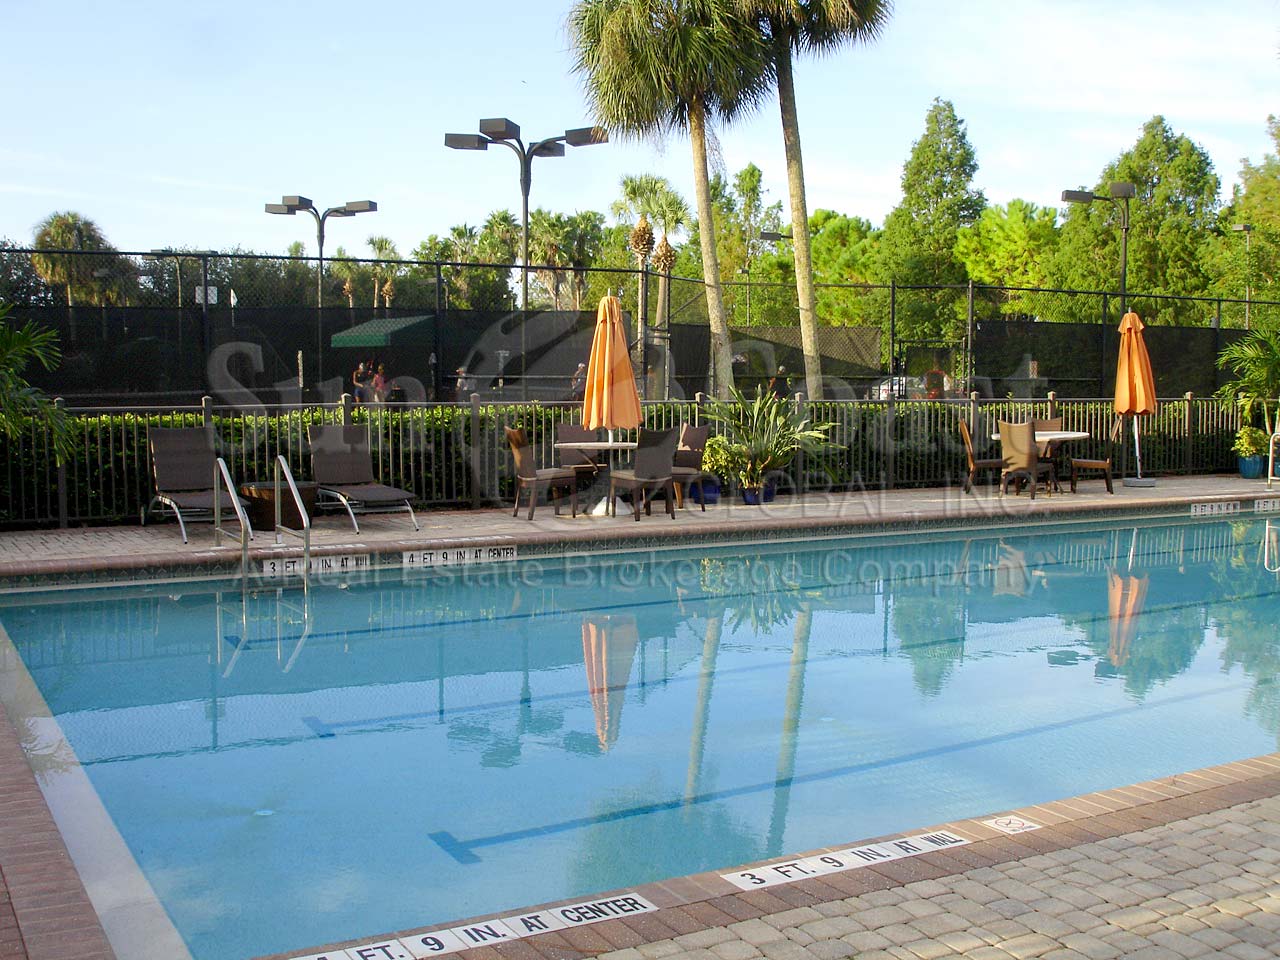 OLDE CYPRESS Fitness Facilities, Tennis and Community Pool